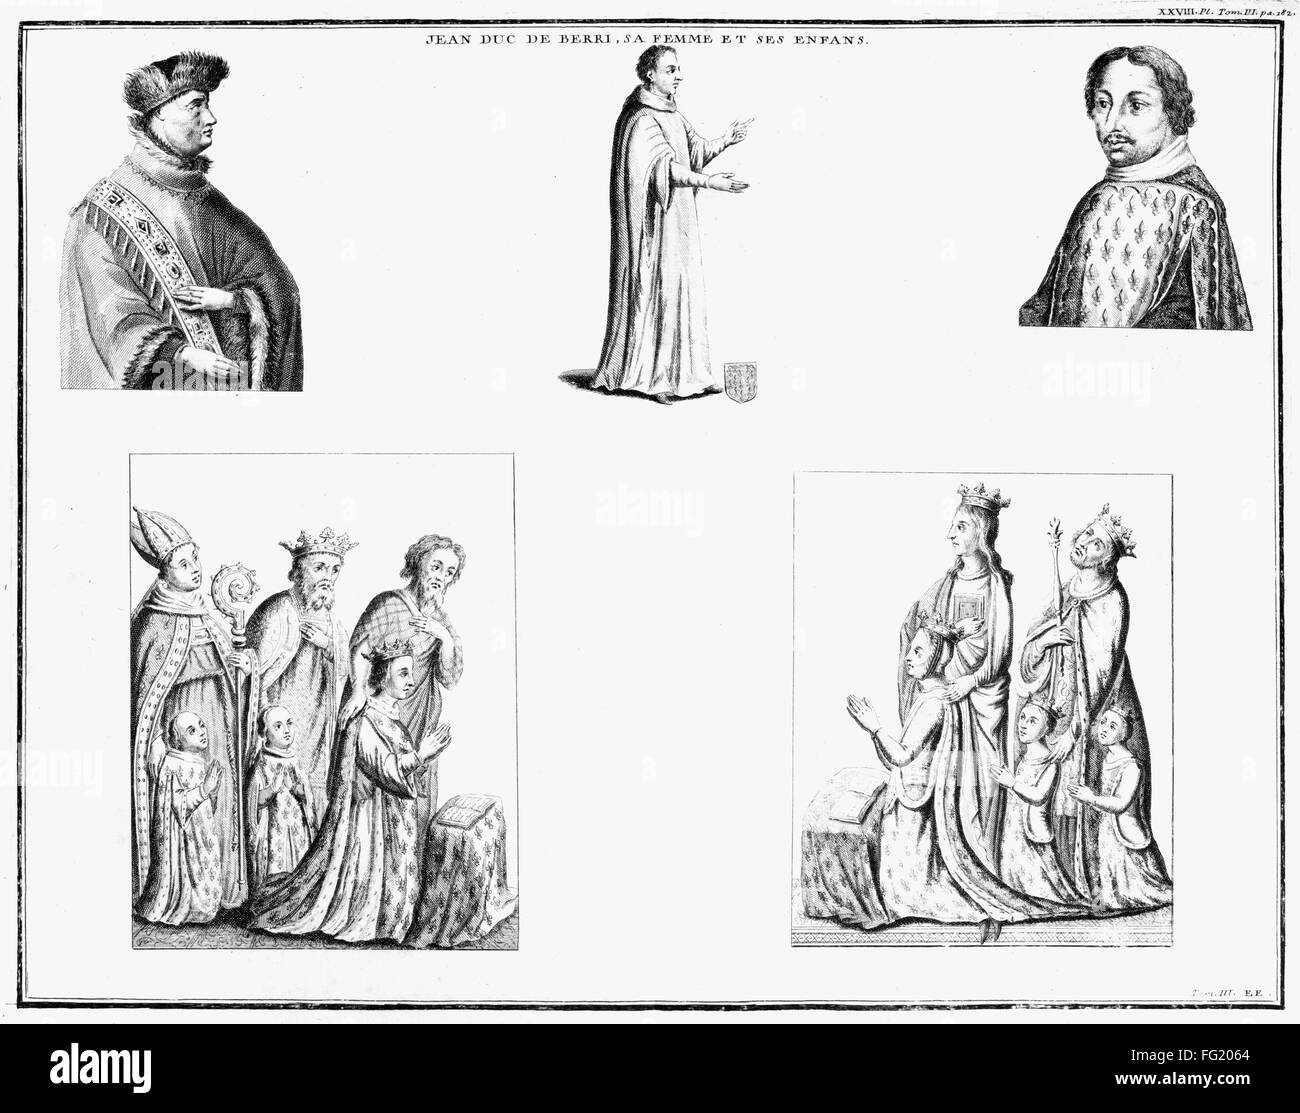 JOHN, DUKE OF BERRY /n(1340-1416). Duke of Berry and Auvergne and Count of Poitiers and Montpensier. With his wife and children. Engraving, 19th century. Stock Photo